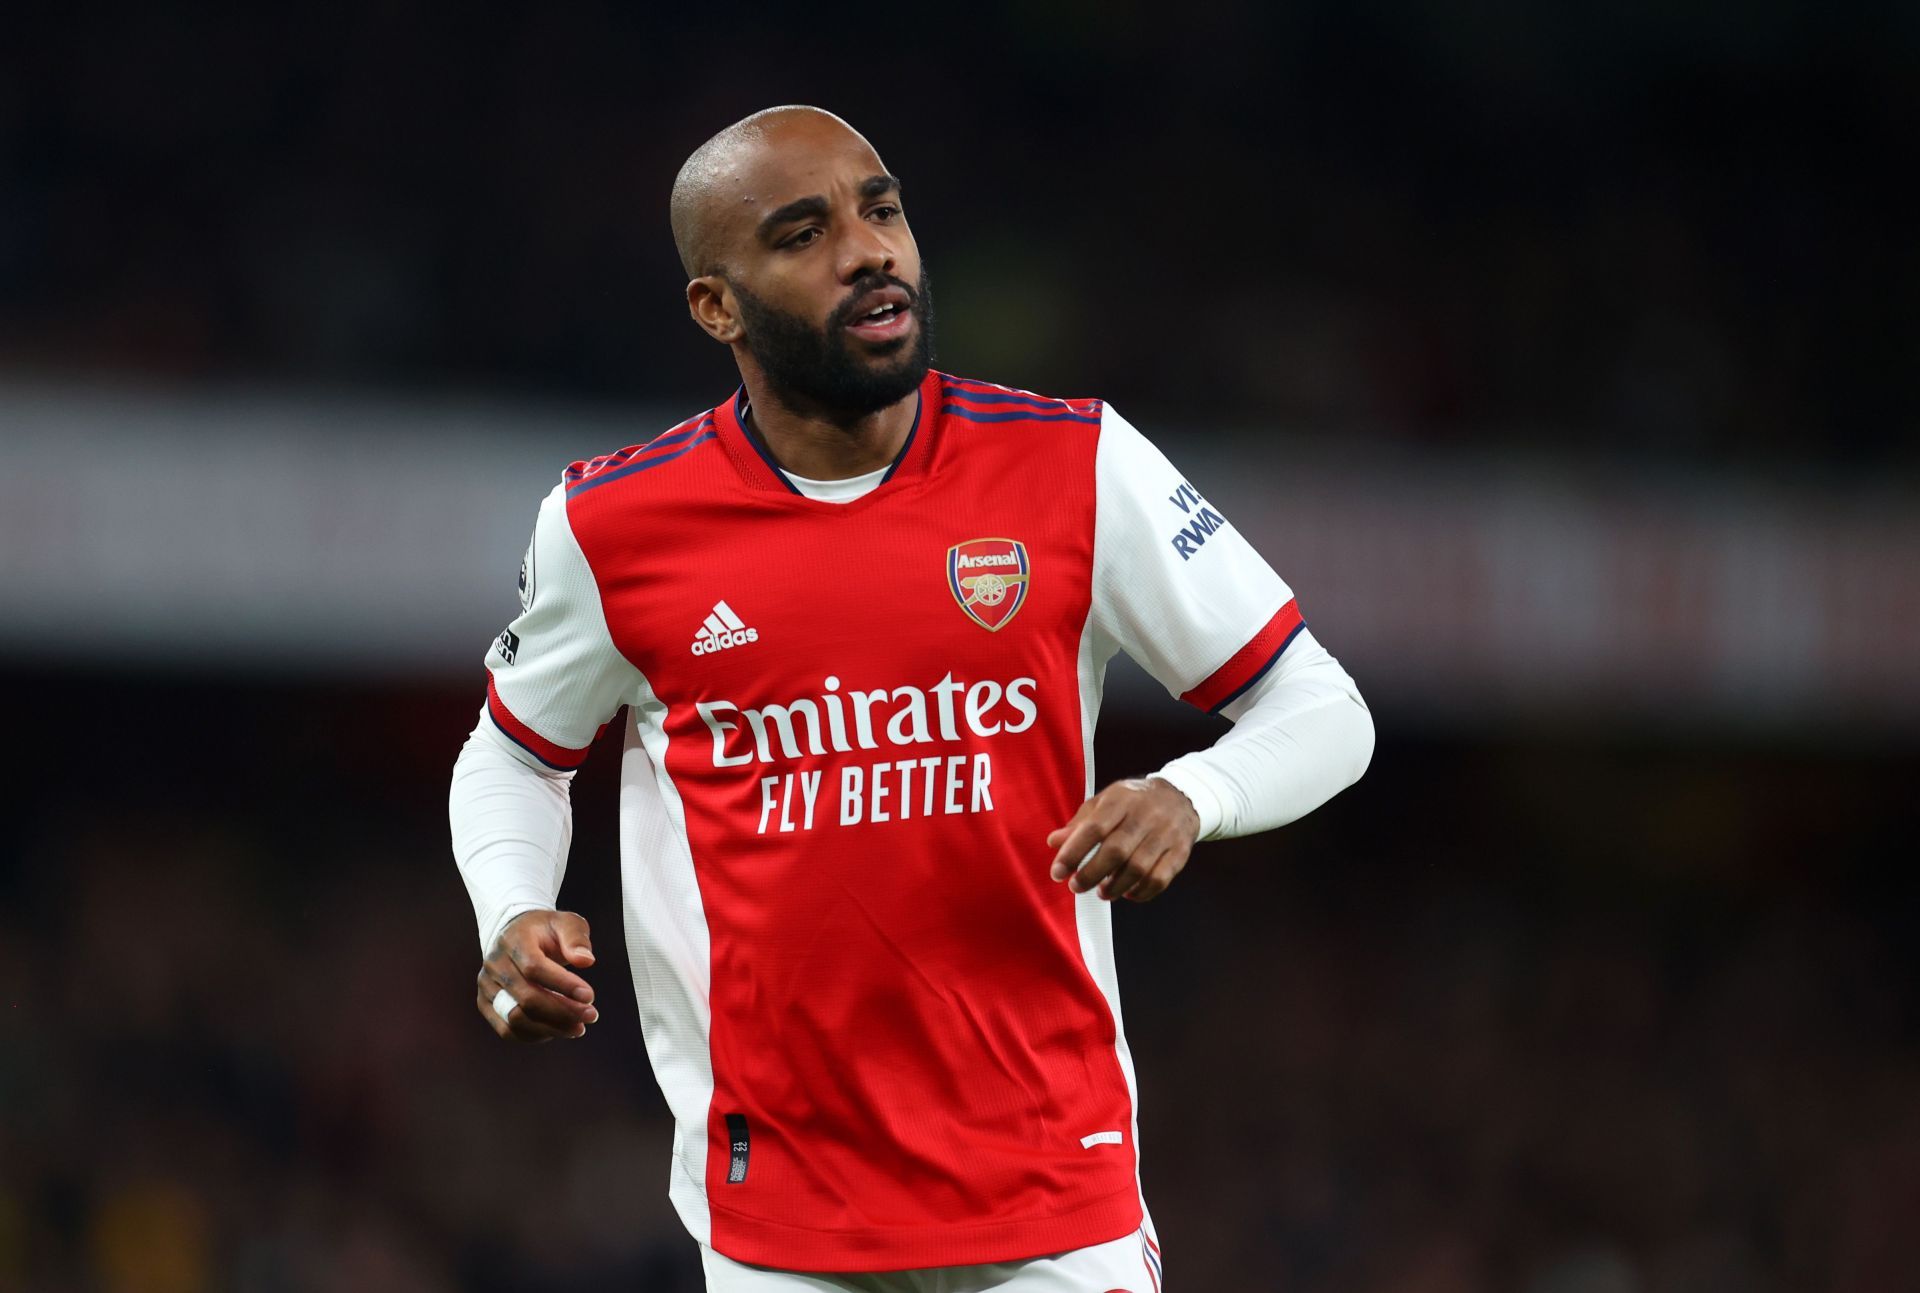 Alexandre Lacazette has revealed that he is on the lookout for his next destination.